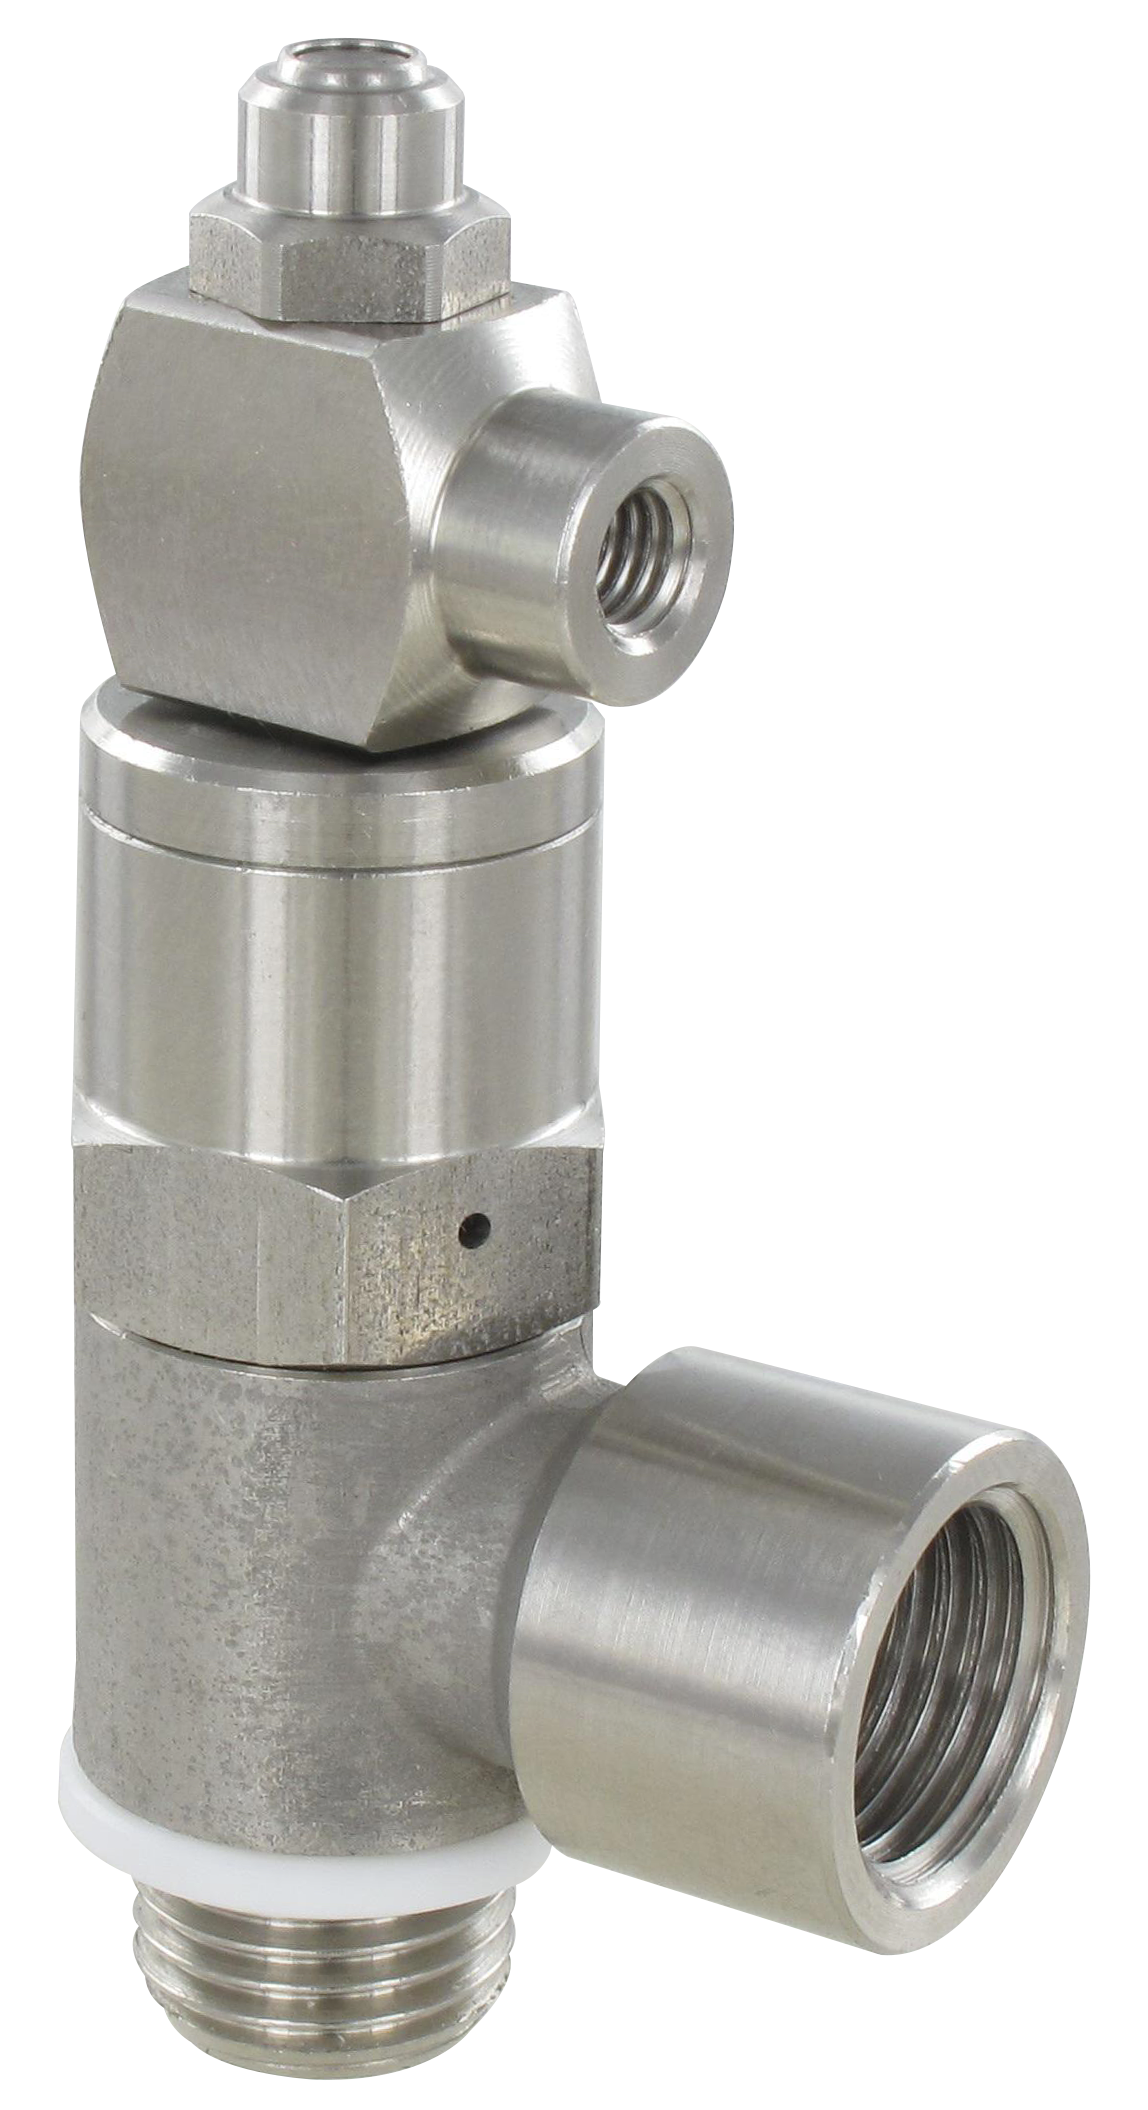 316L stainless steel pilot operated check valves for pneumatic cylinders AISI 316 L stainless steel non-return fittings